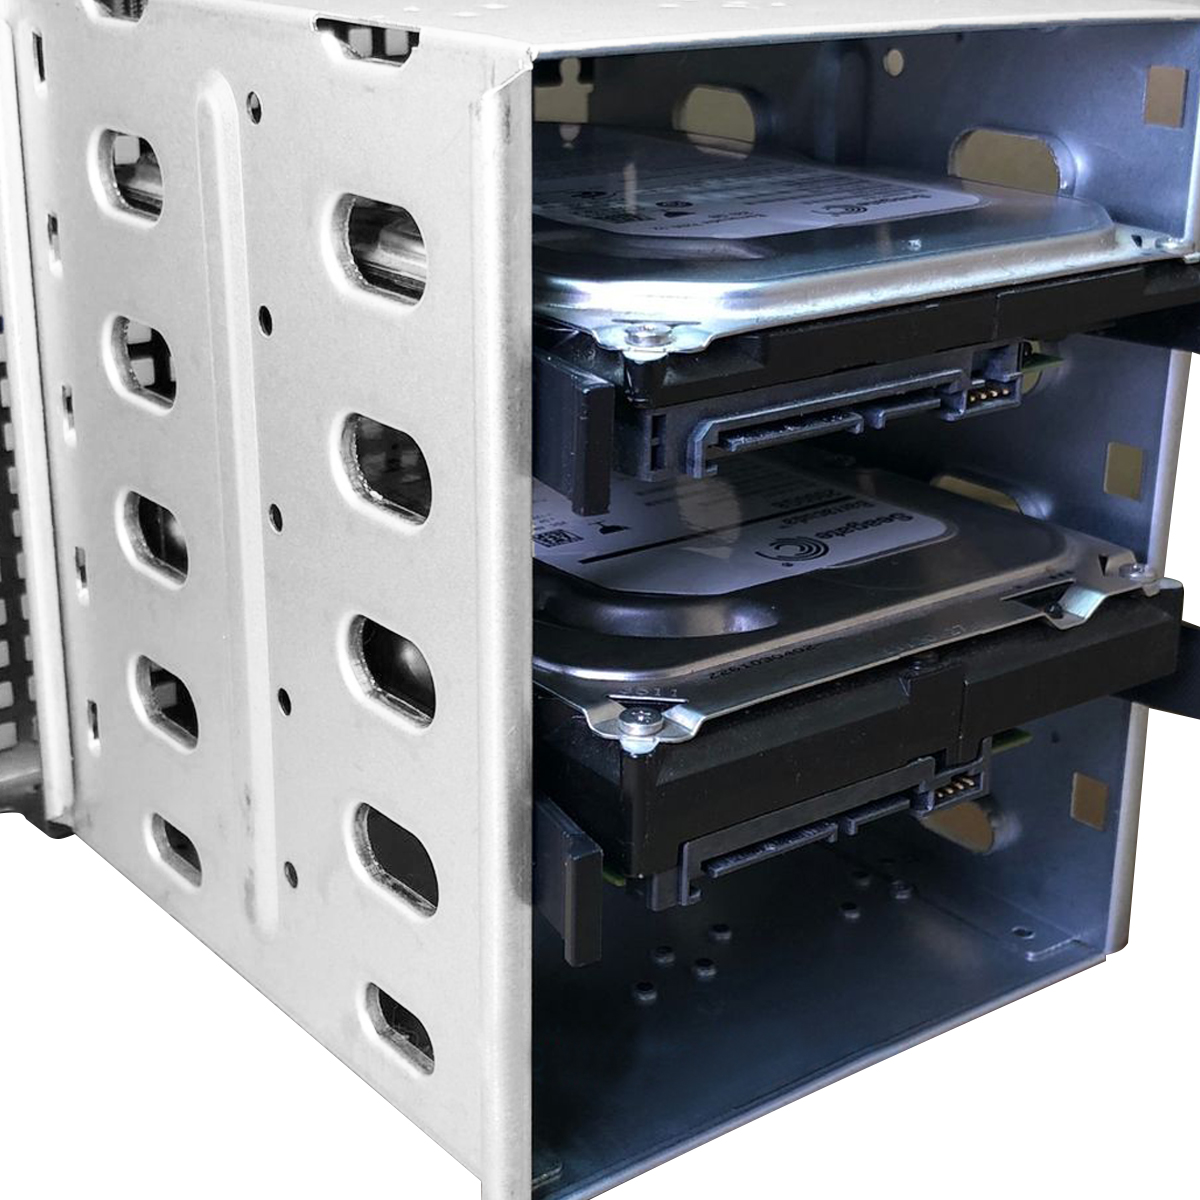 5.25" to 5x 3.5" SATA SAS HDD Cage Rack Hard Drive Tray Caddy Converter with Fan Space 44